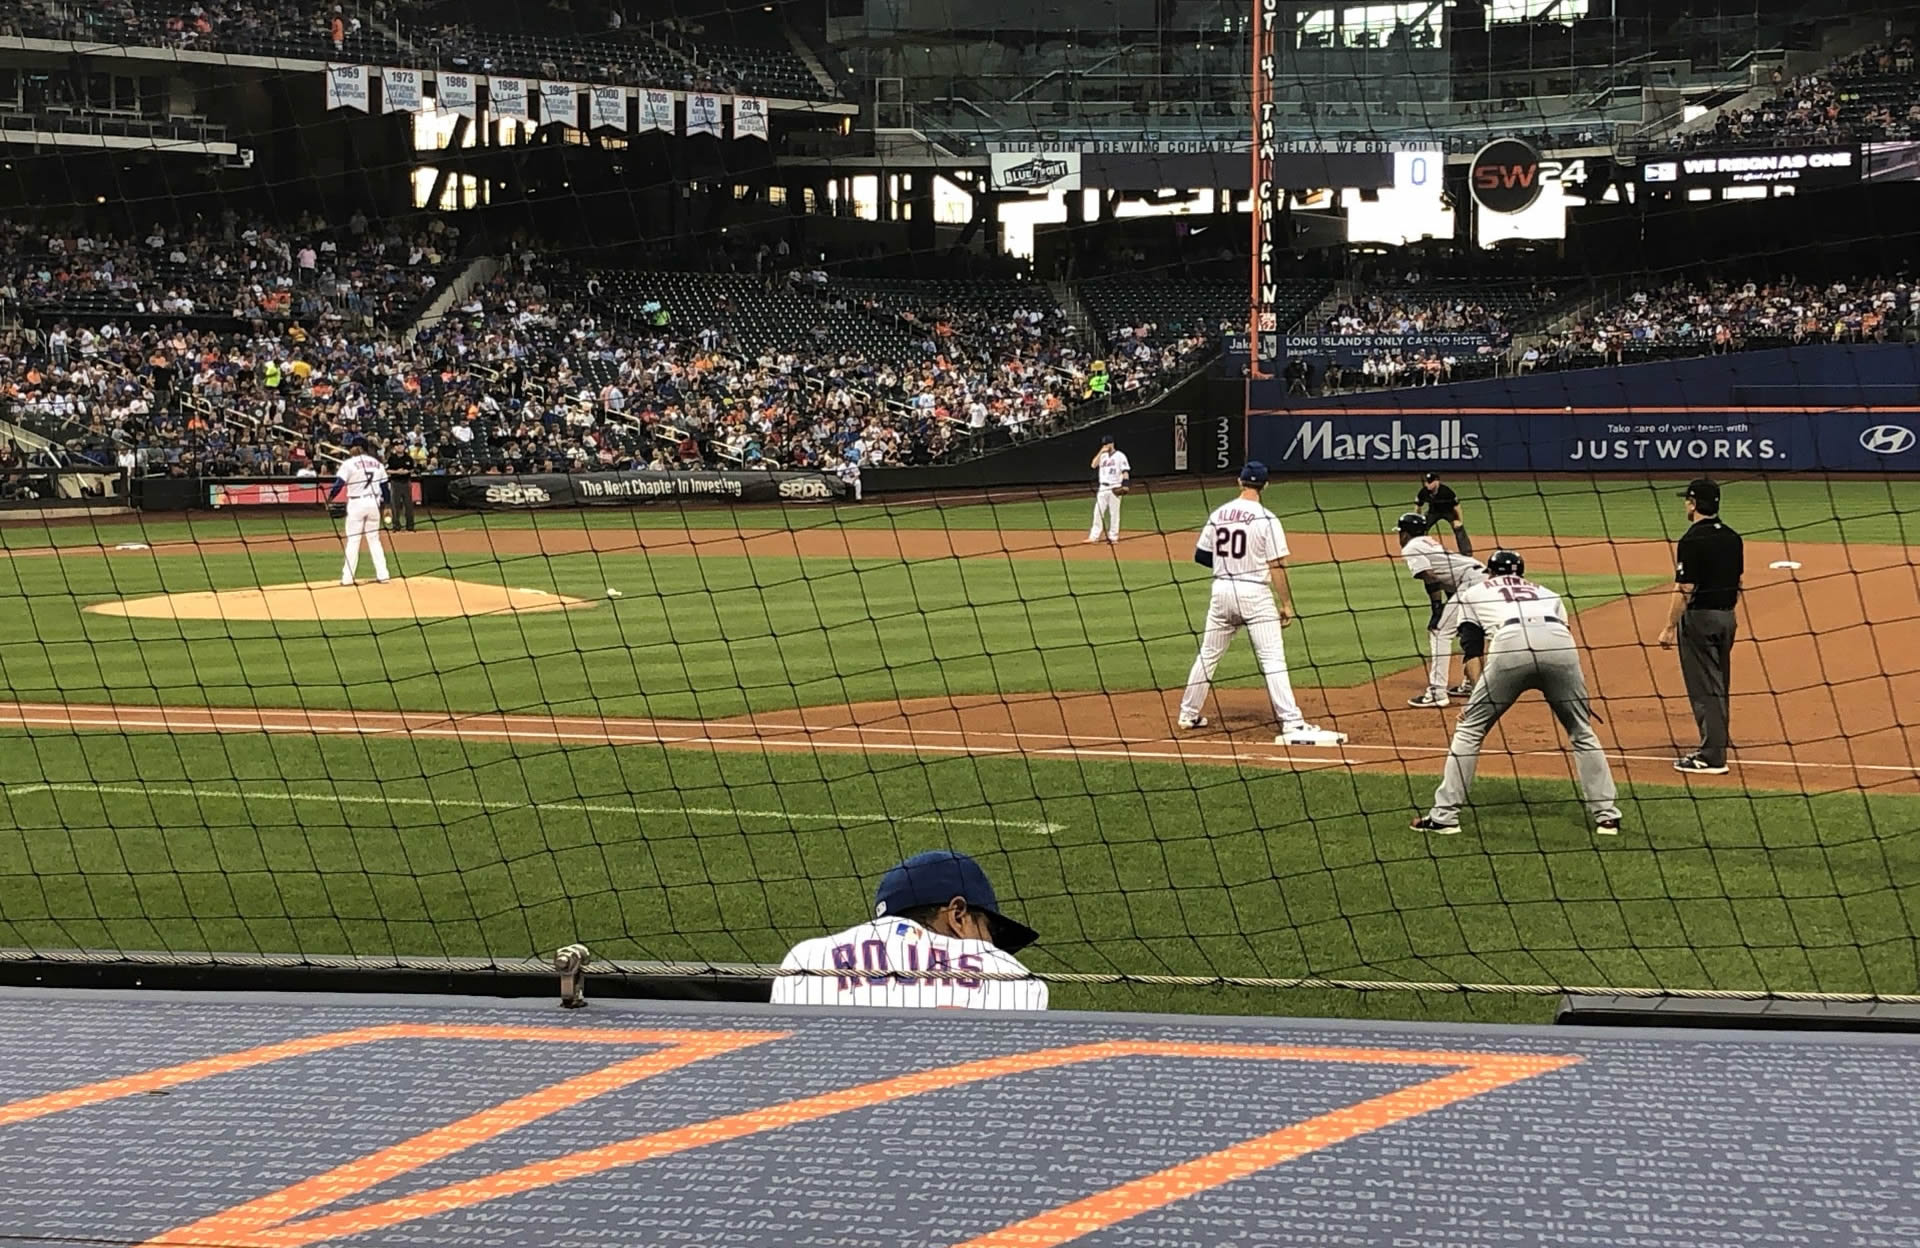 section 112, row 1 seat view  - citi field